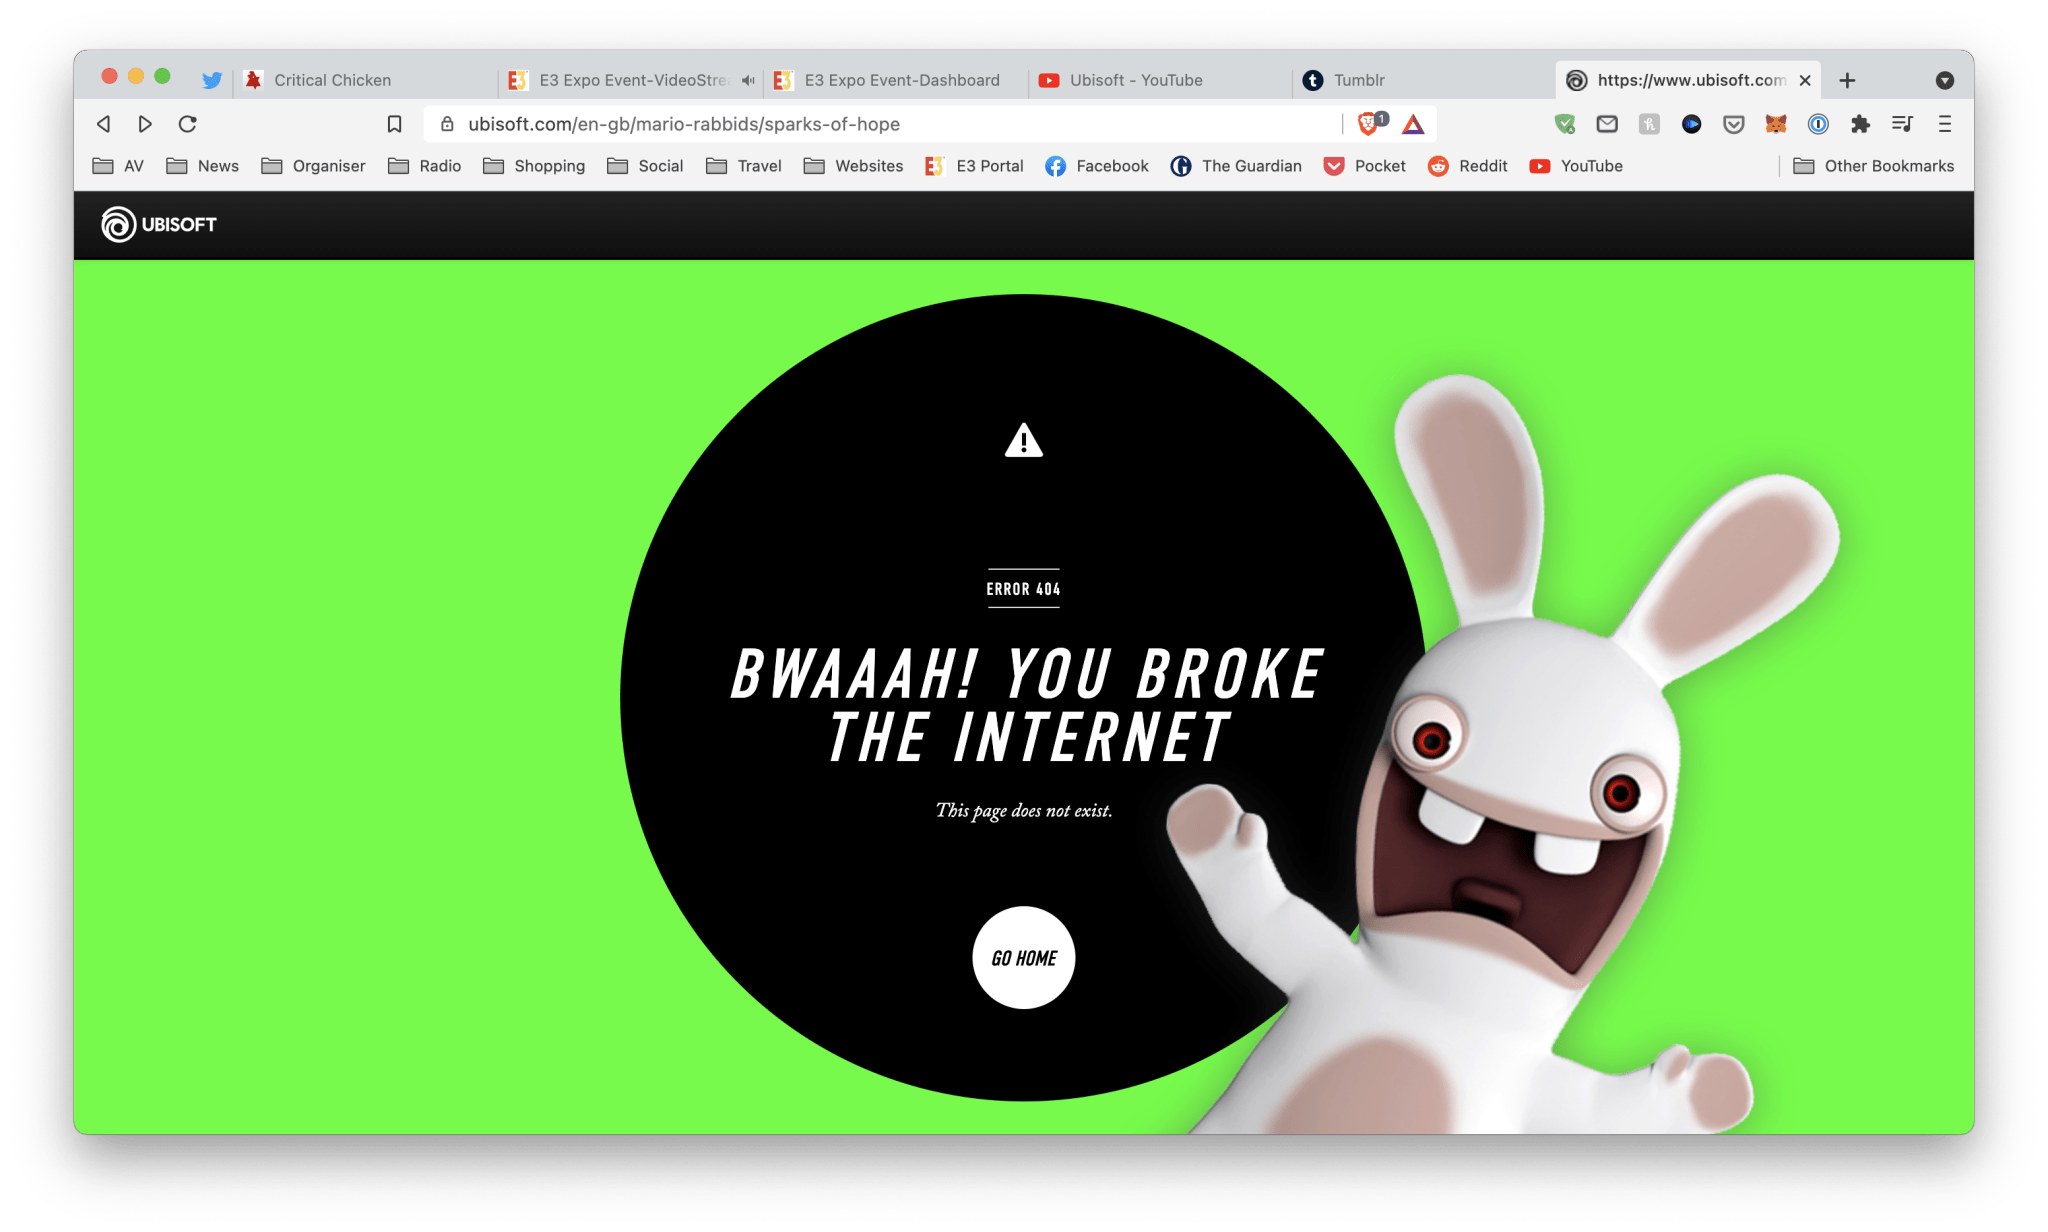 A screenshot of a web browser showing an error message. Text in picture: "Error 404. Bwaaah! You broke the internet. This page does not exist."